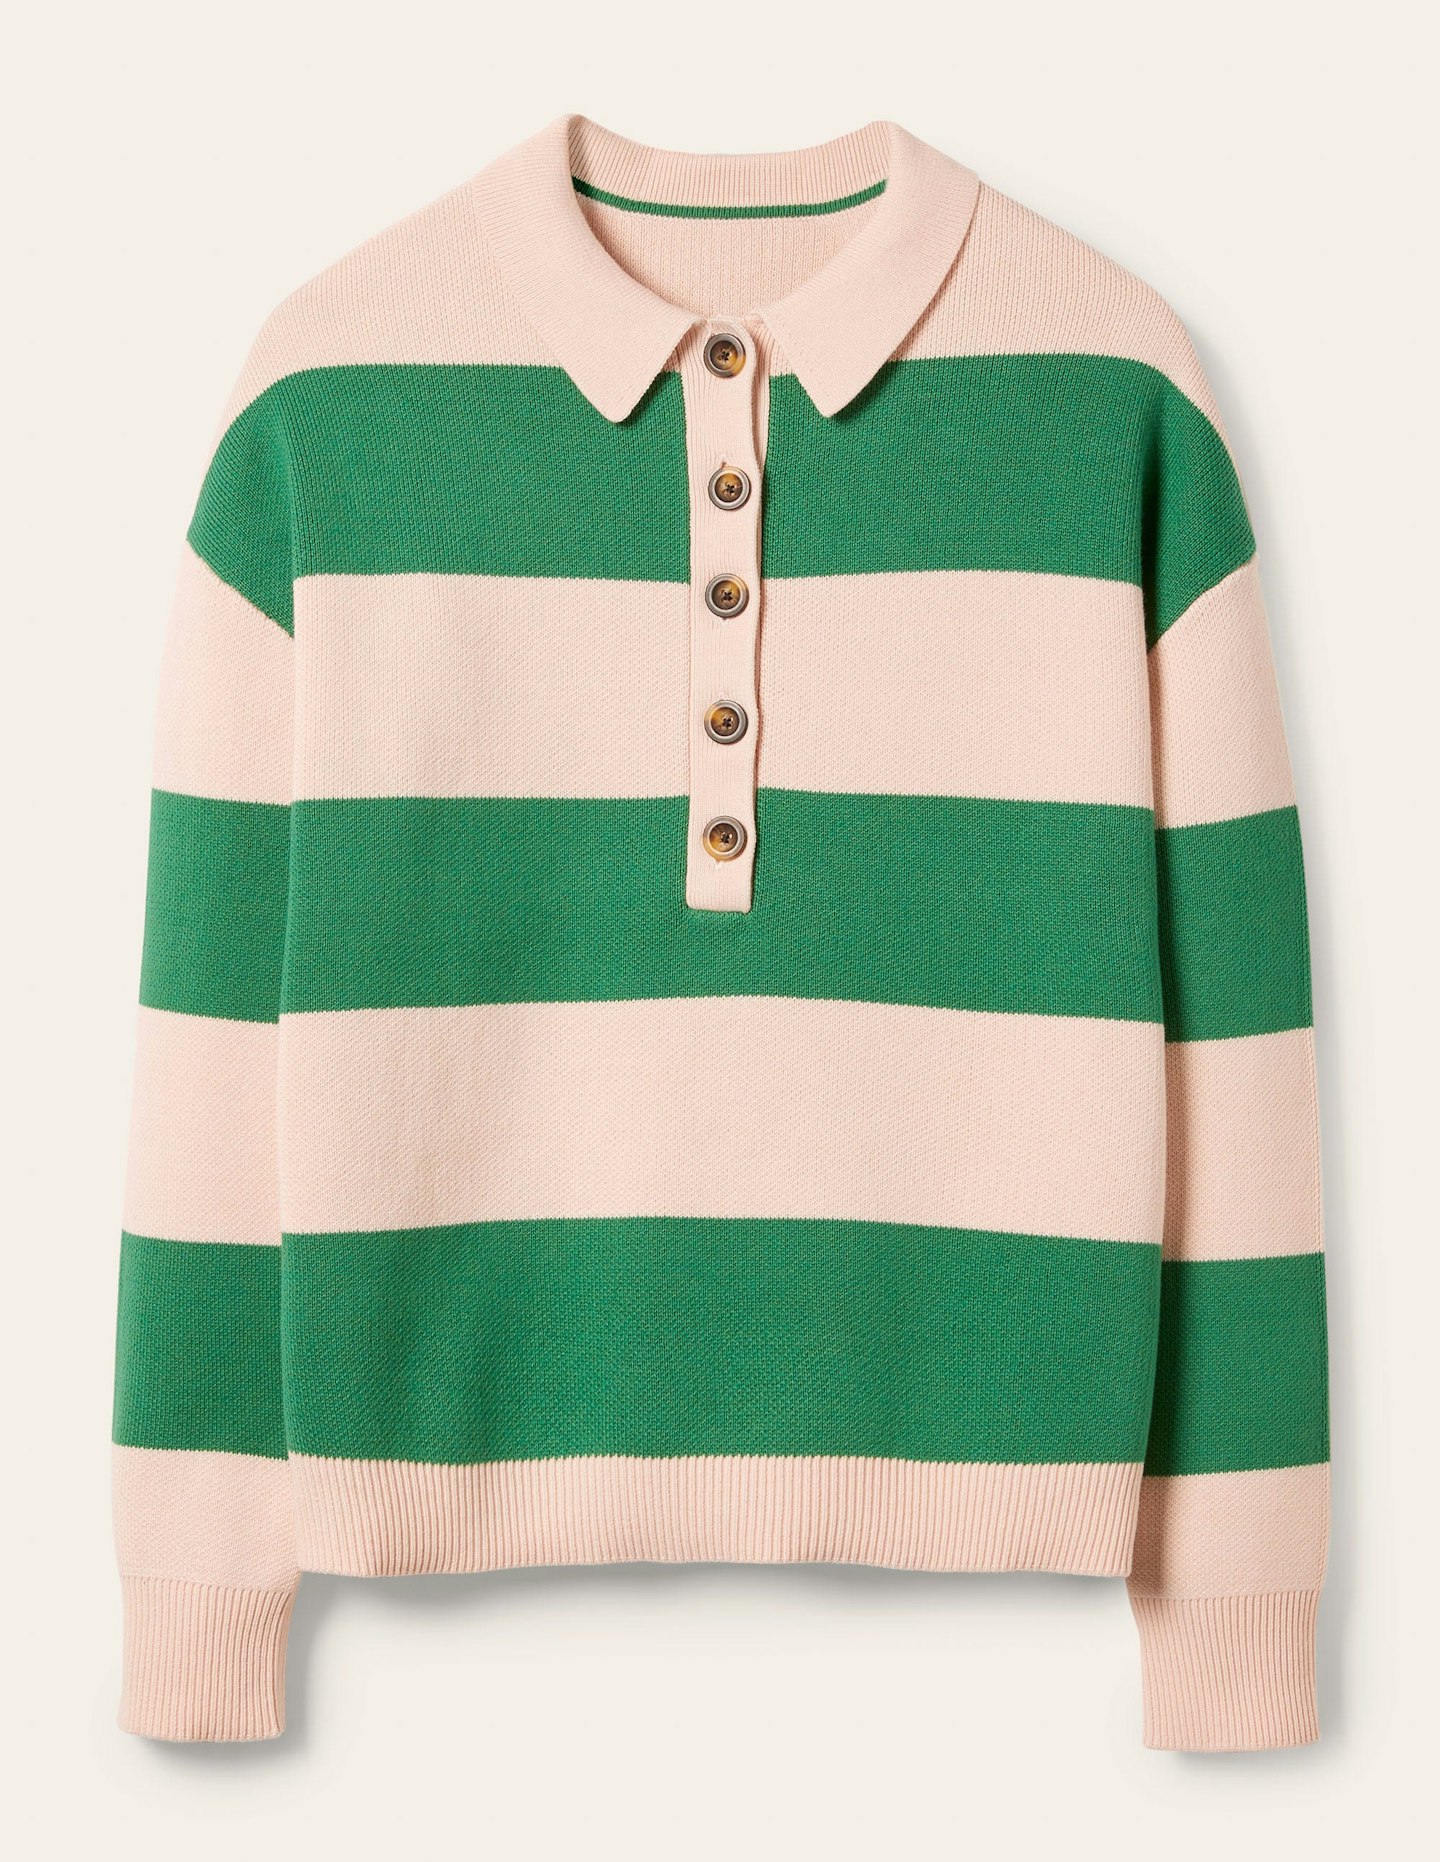 Boden, Striped Knitted Rugby Jumper, £95